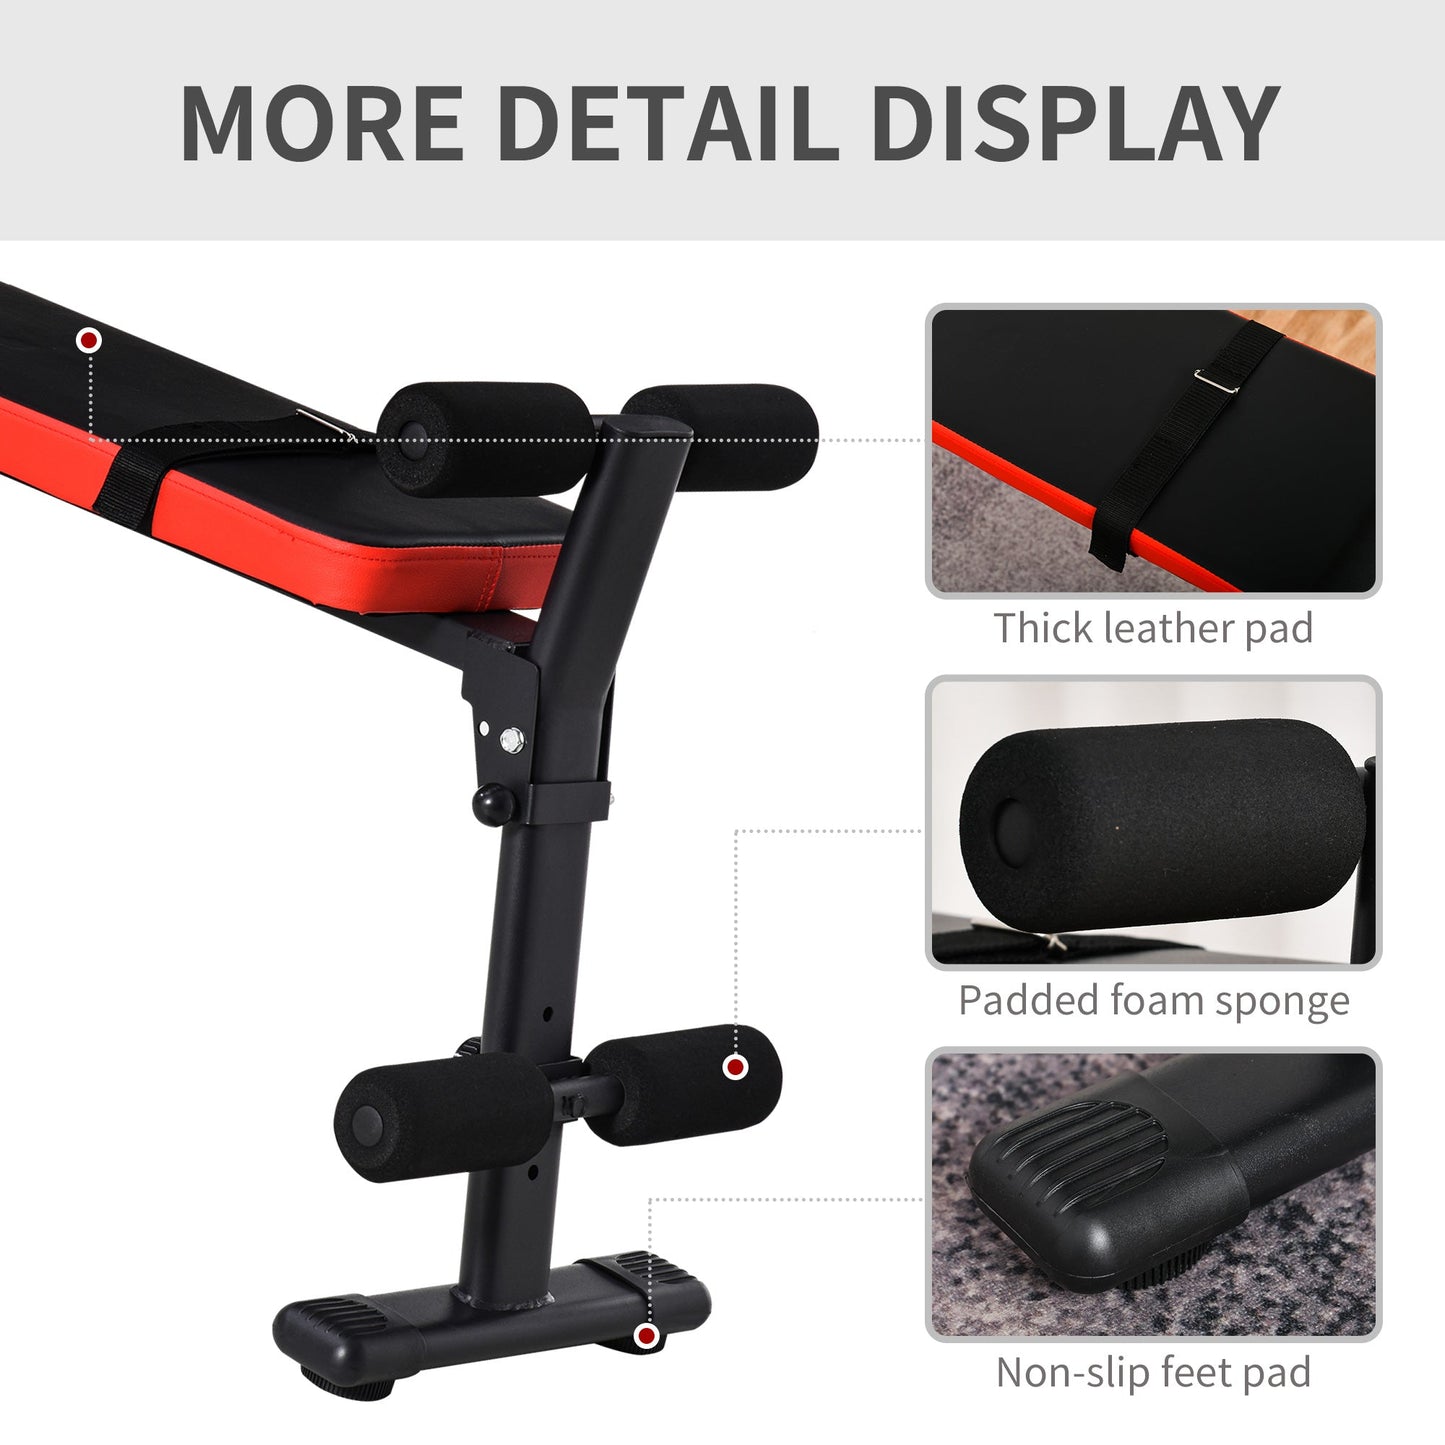 HOMCOM Foldable Sit Up Bench Leg Placement Adjustable Exercise Machine for Home Office